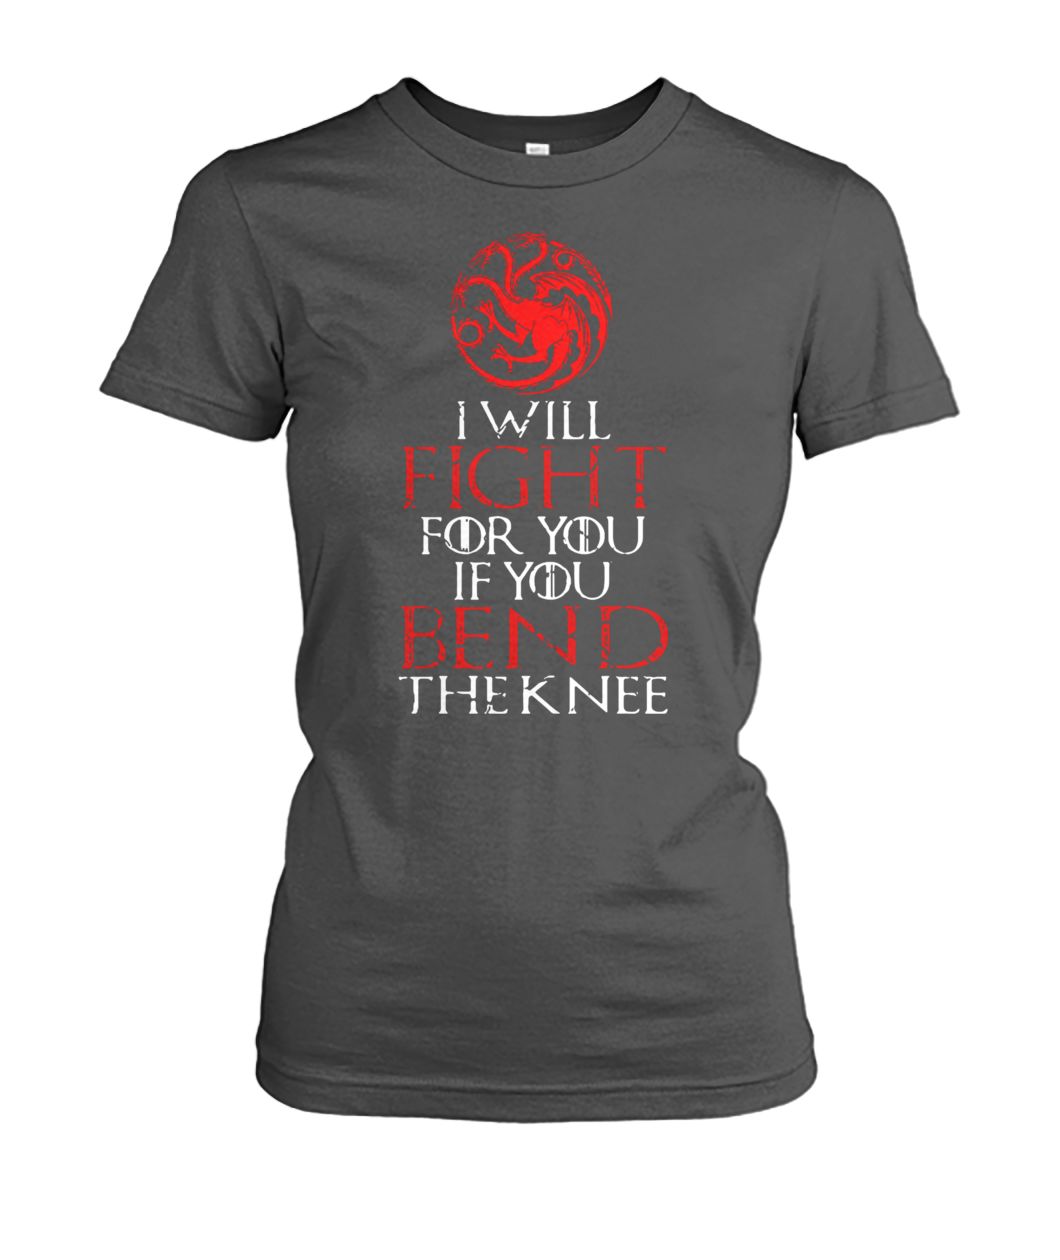 Game of thrones house targaryen I will fight for you if you bend the knee women's crew tee